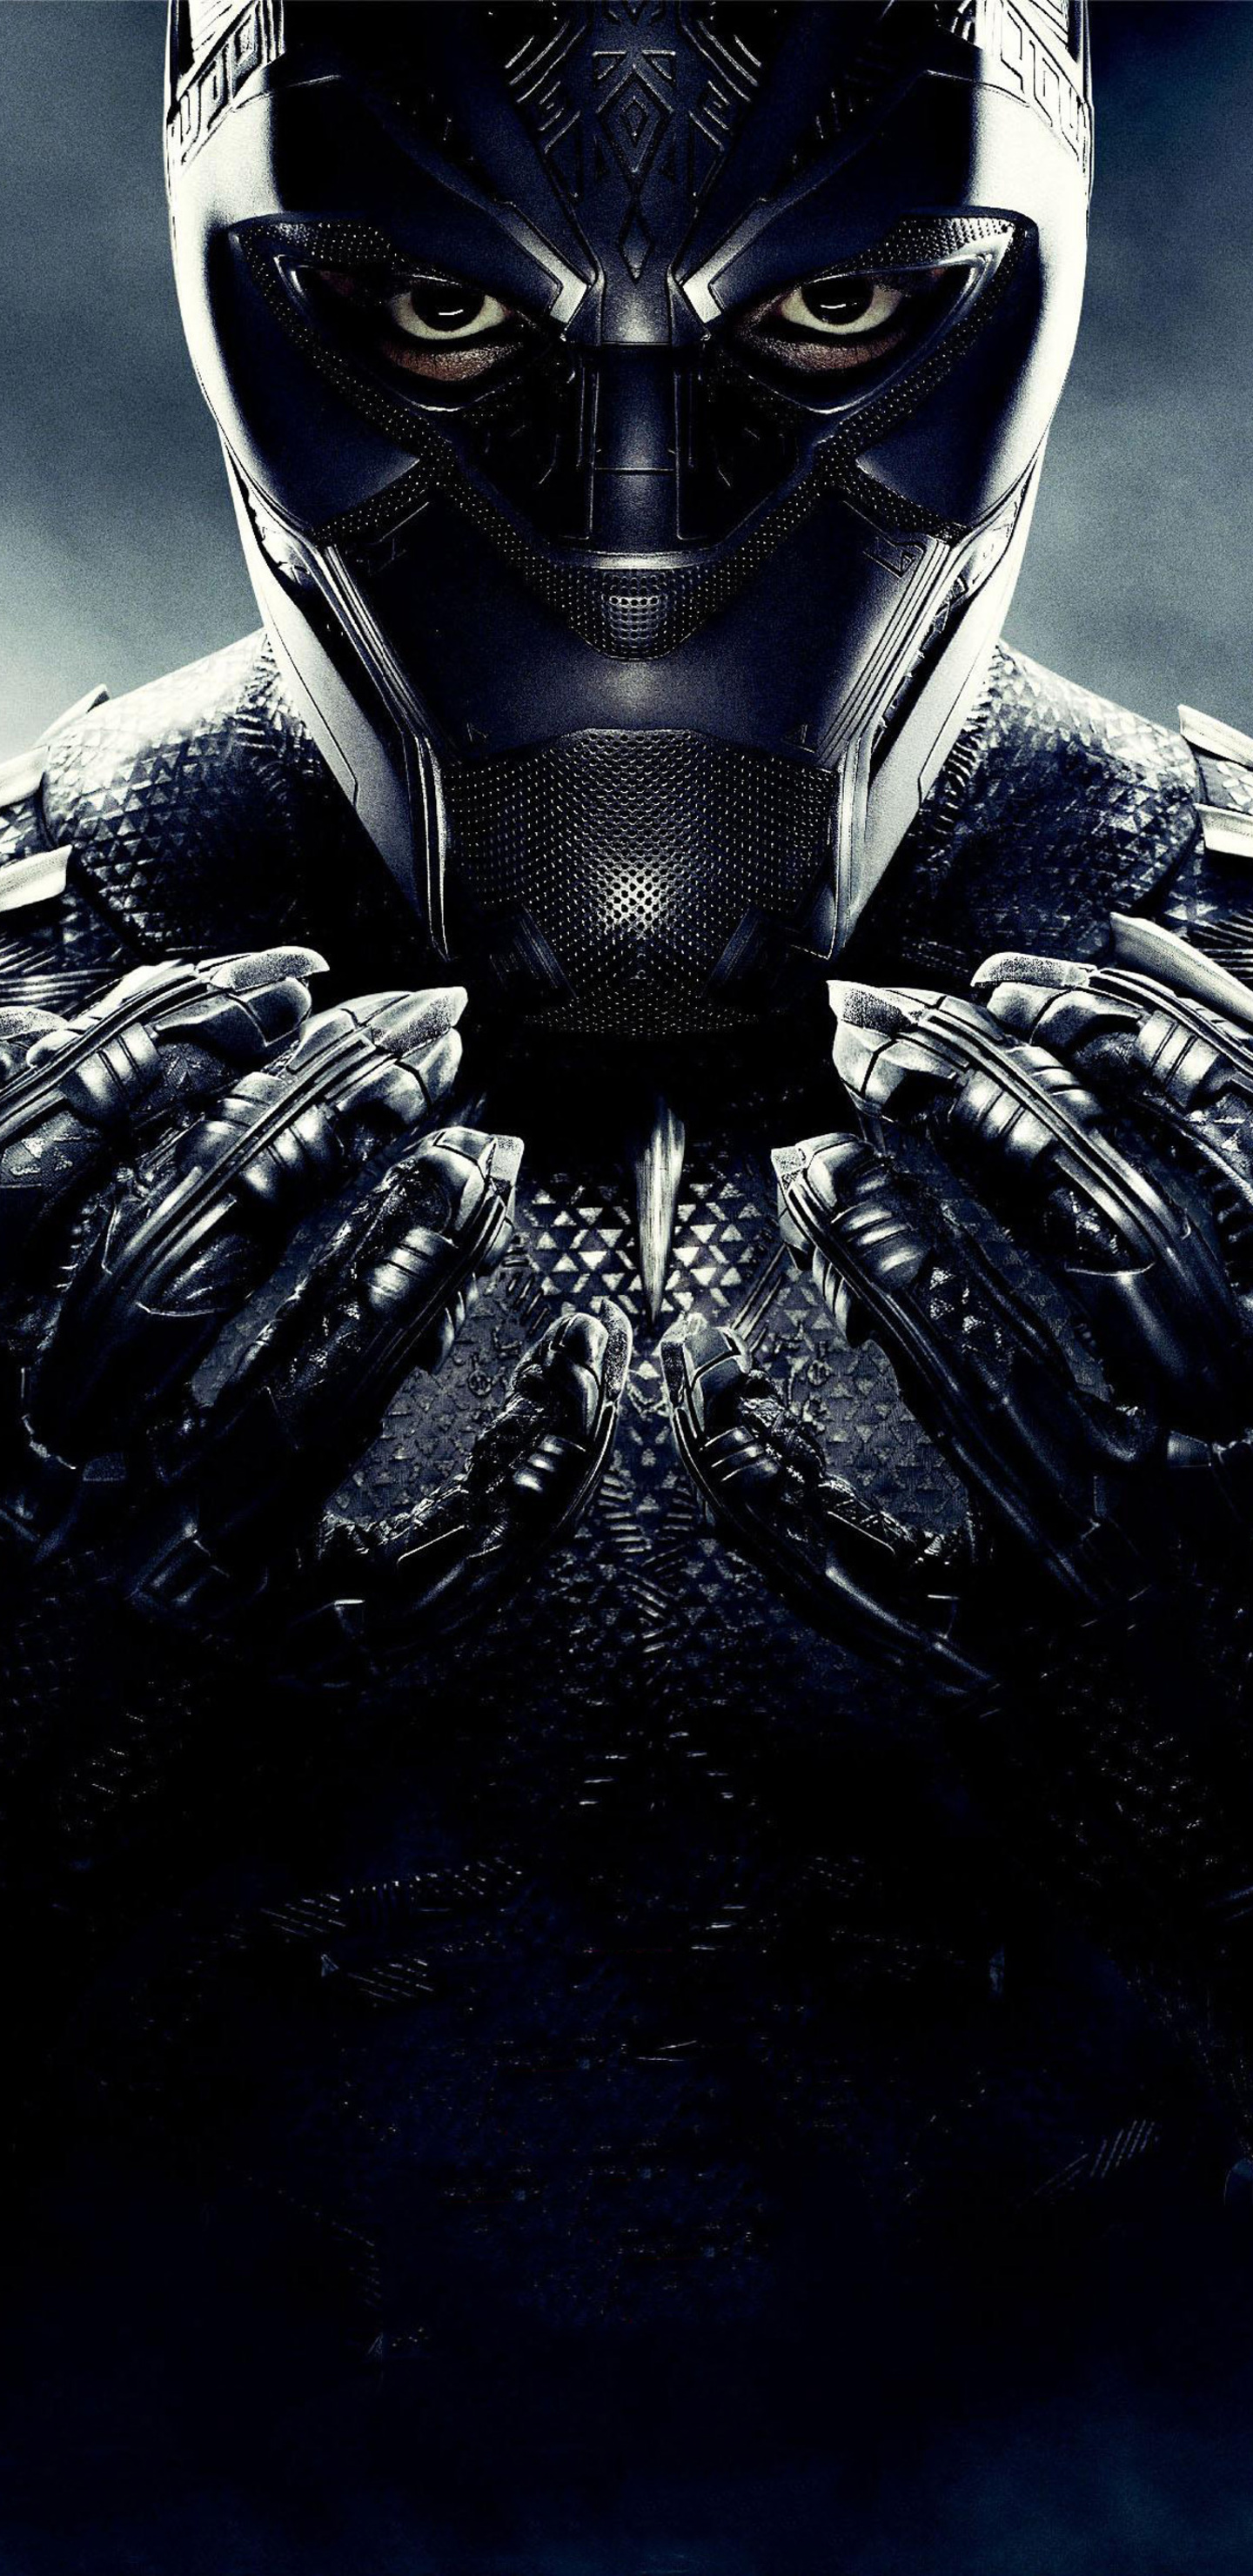 1440x2960 Black Panther 2018 Poster Samsung Galaxy S8S8 Note 8